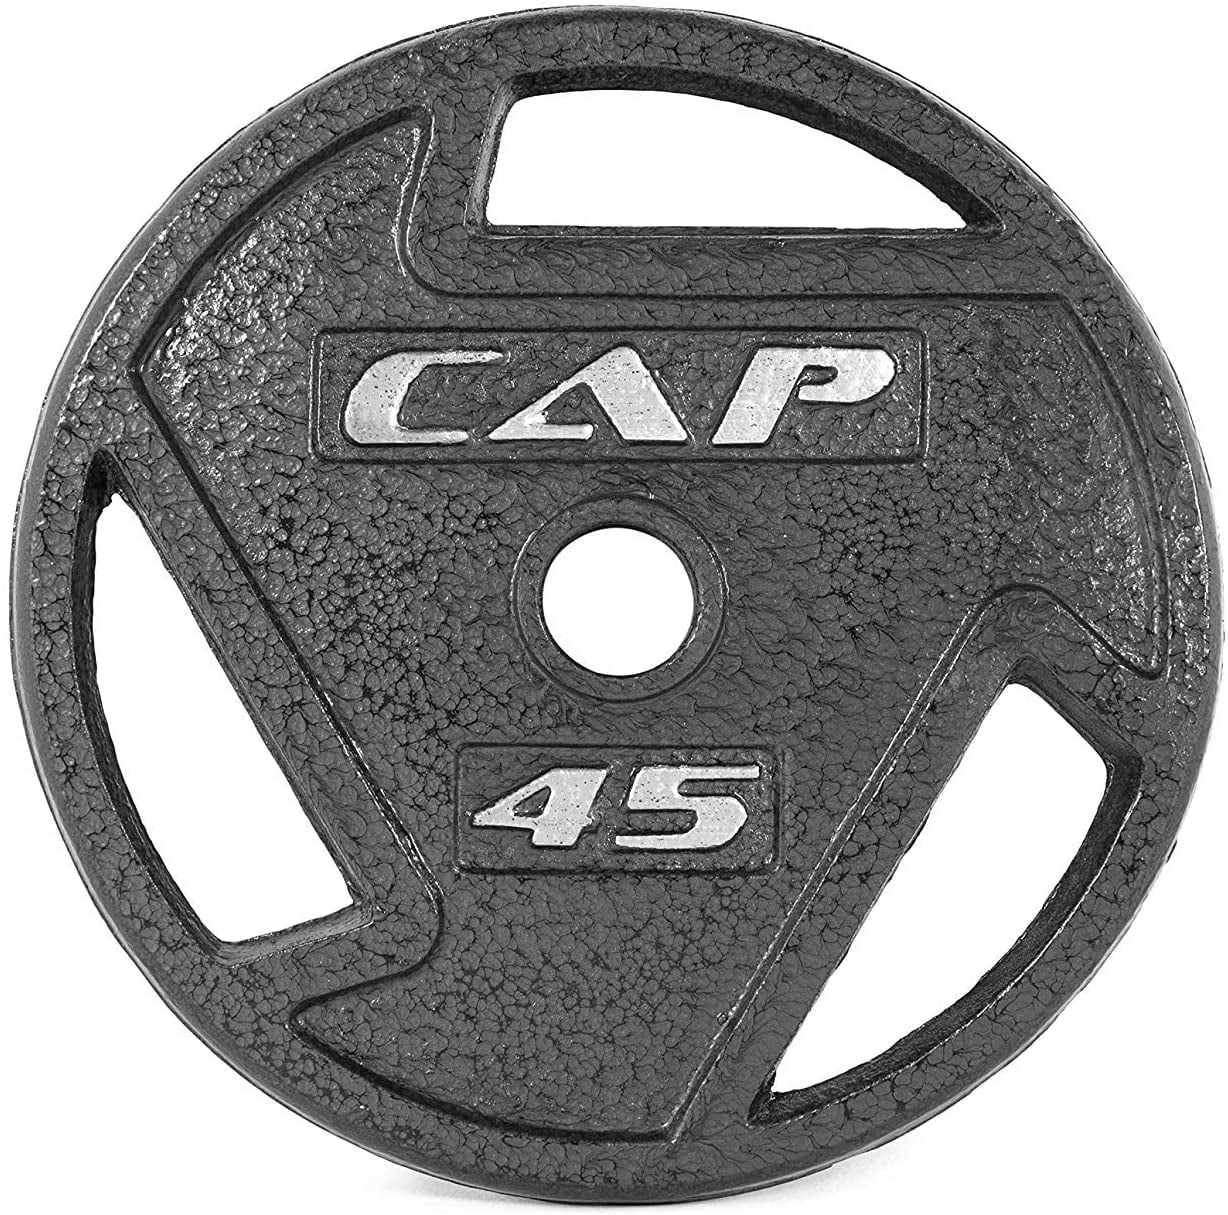 2x25 lb Plates CAP 50 lb Olympic Weight Plate Set NEW in Box FREE SHIP